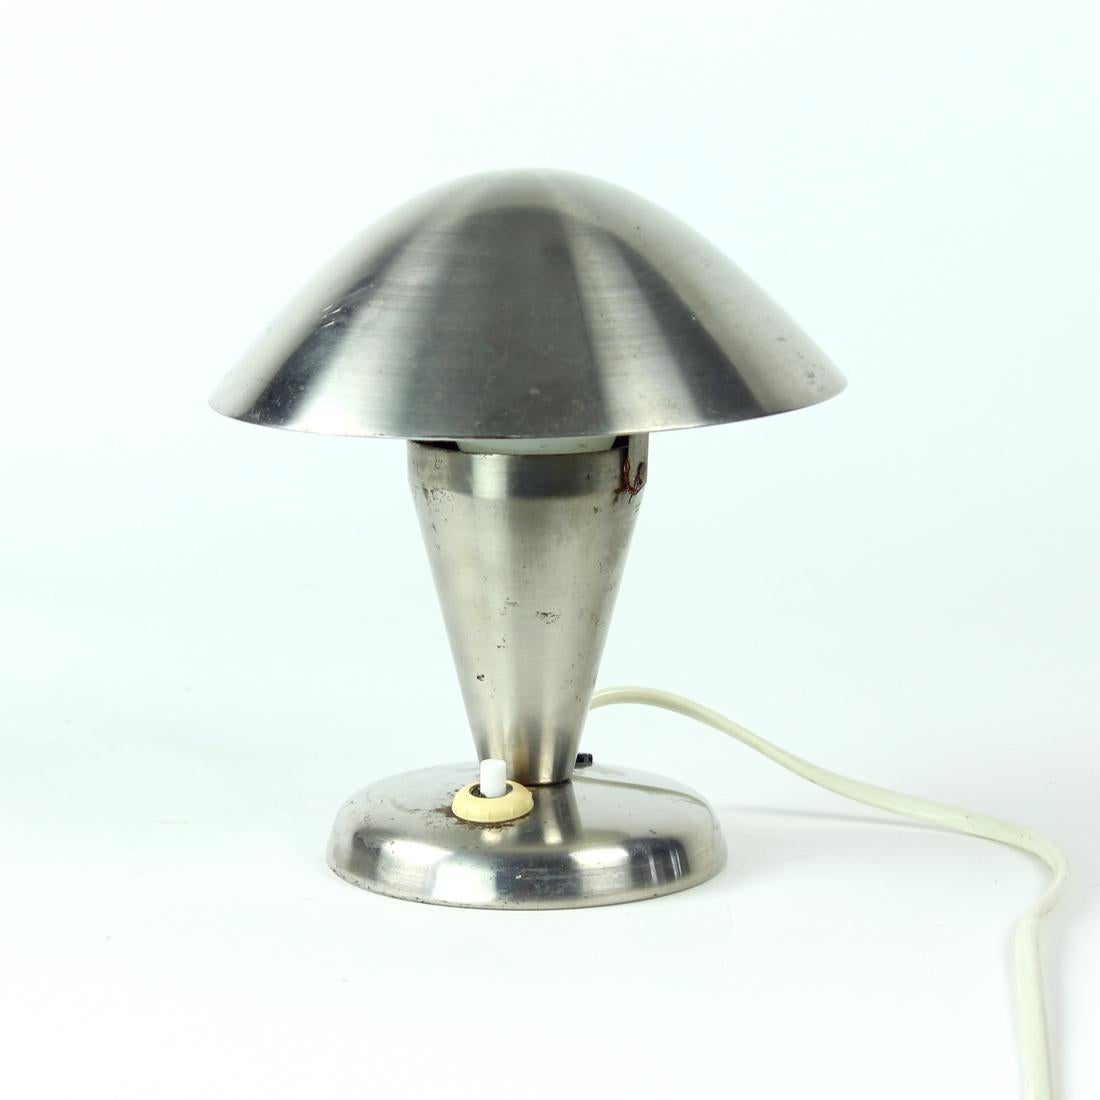 Beautiful iconic table lamp designed by Josef Hurka for Napako company in Czechoslovakia in 1960s. the lamp is made of steel with chrome finish. Elegant shape and design with simple and elegant construction. Very good condition, original cabeling in